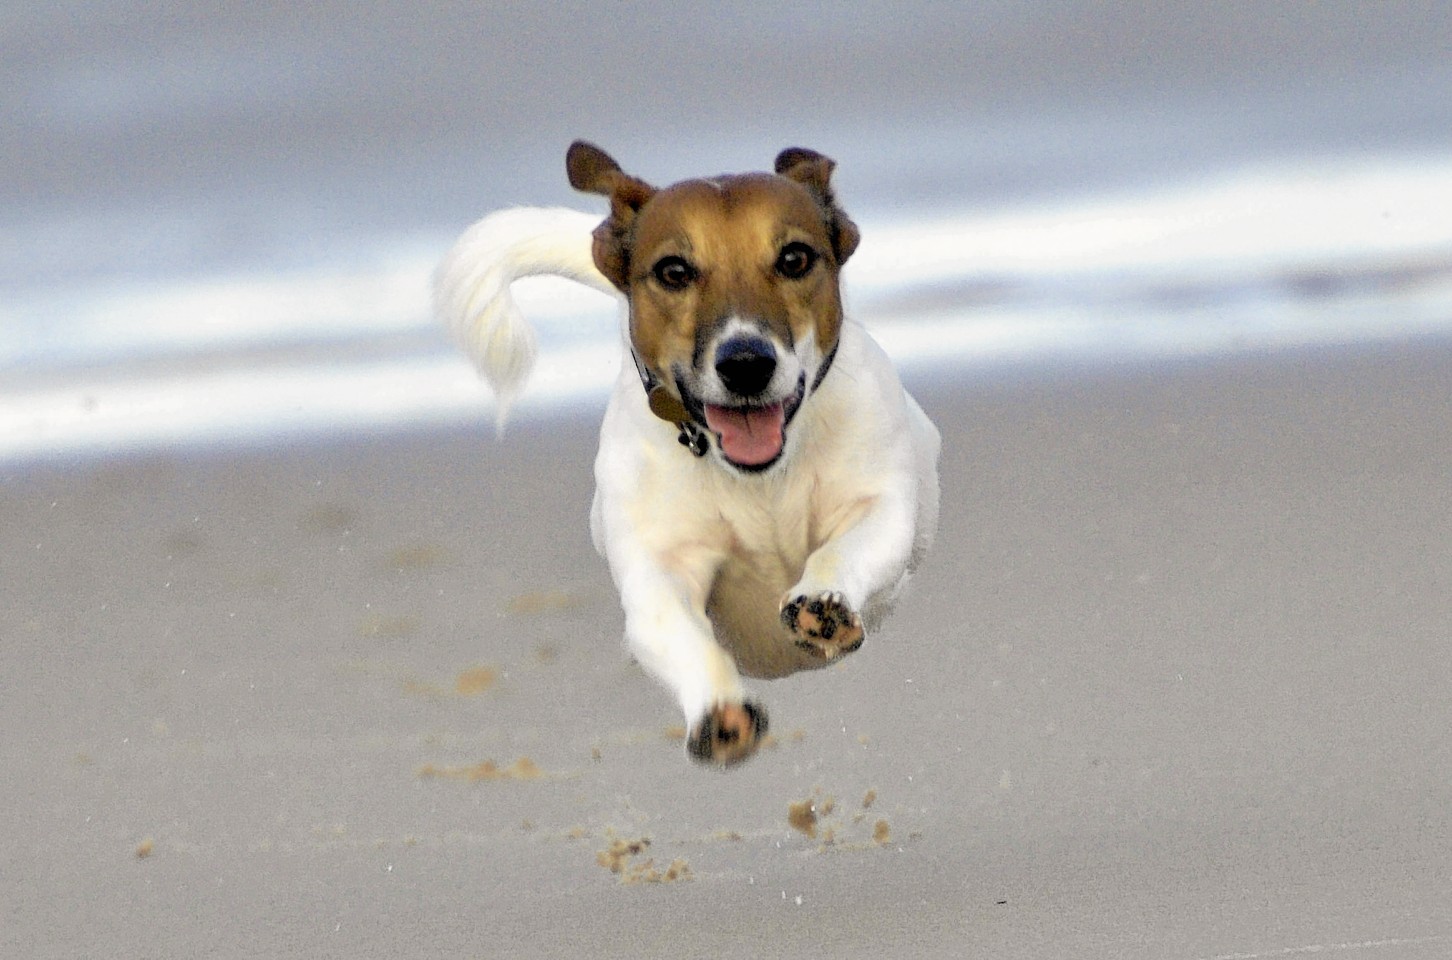 There he is, Superdog in full flight! 